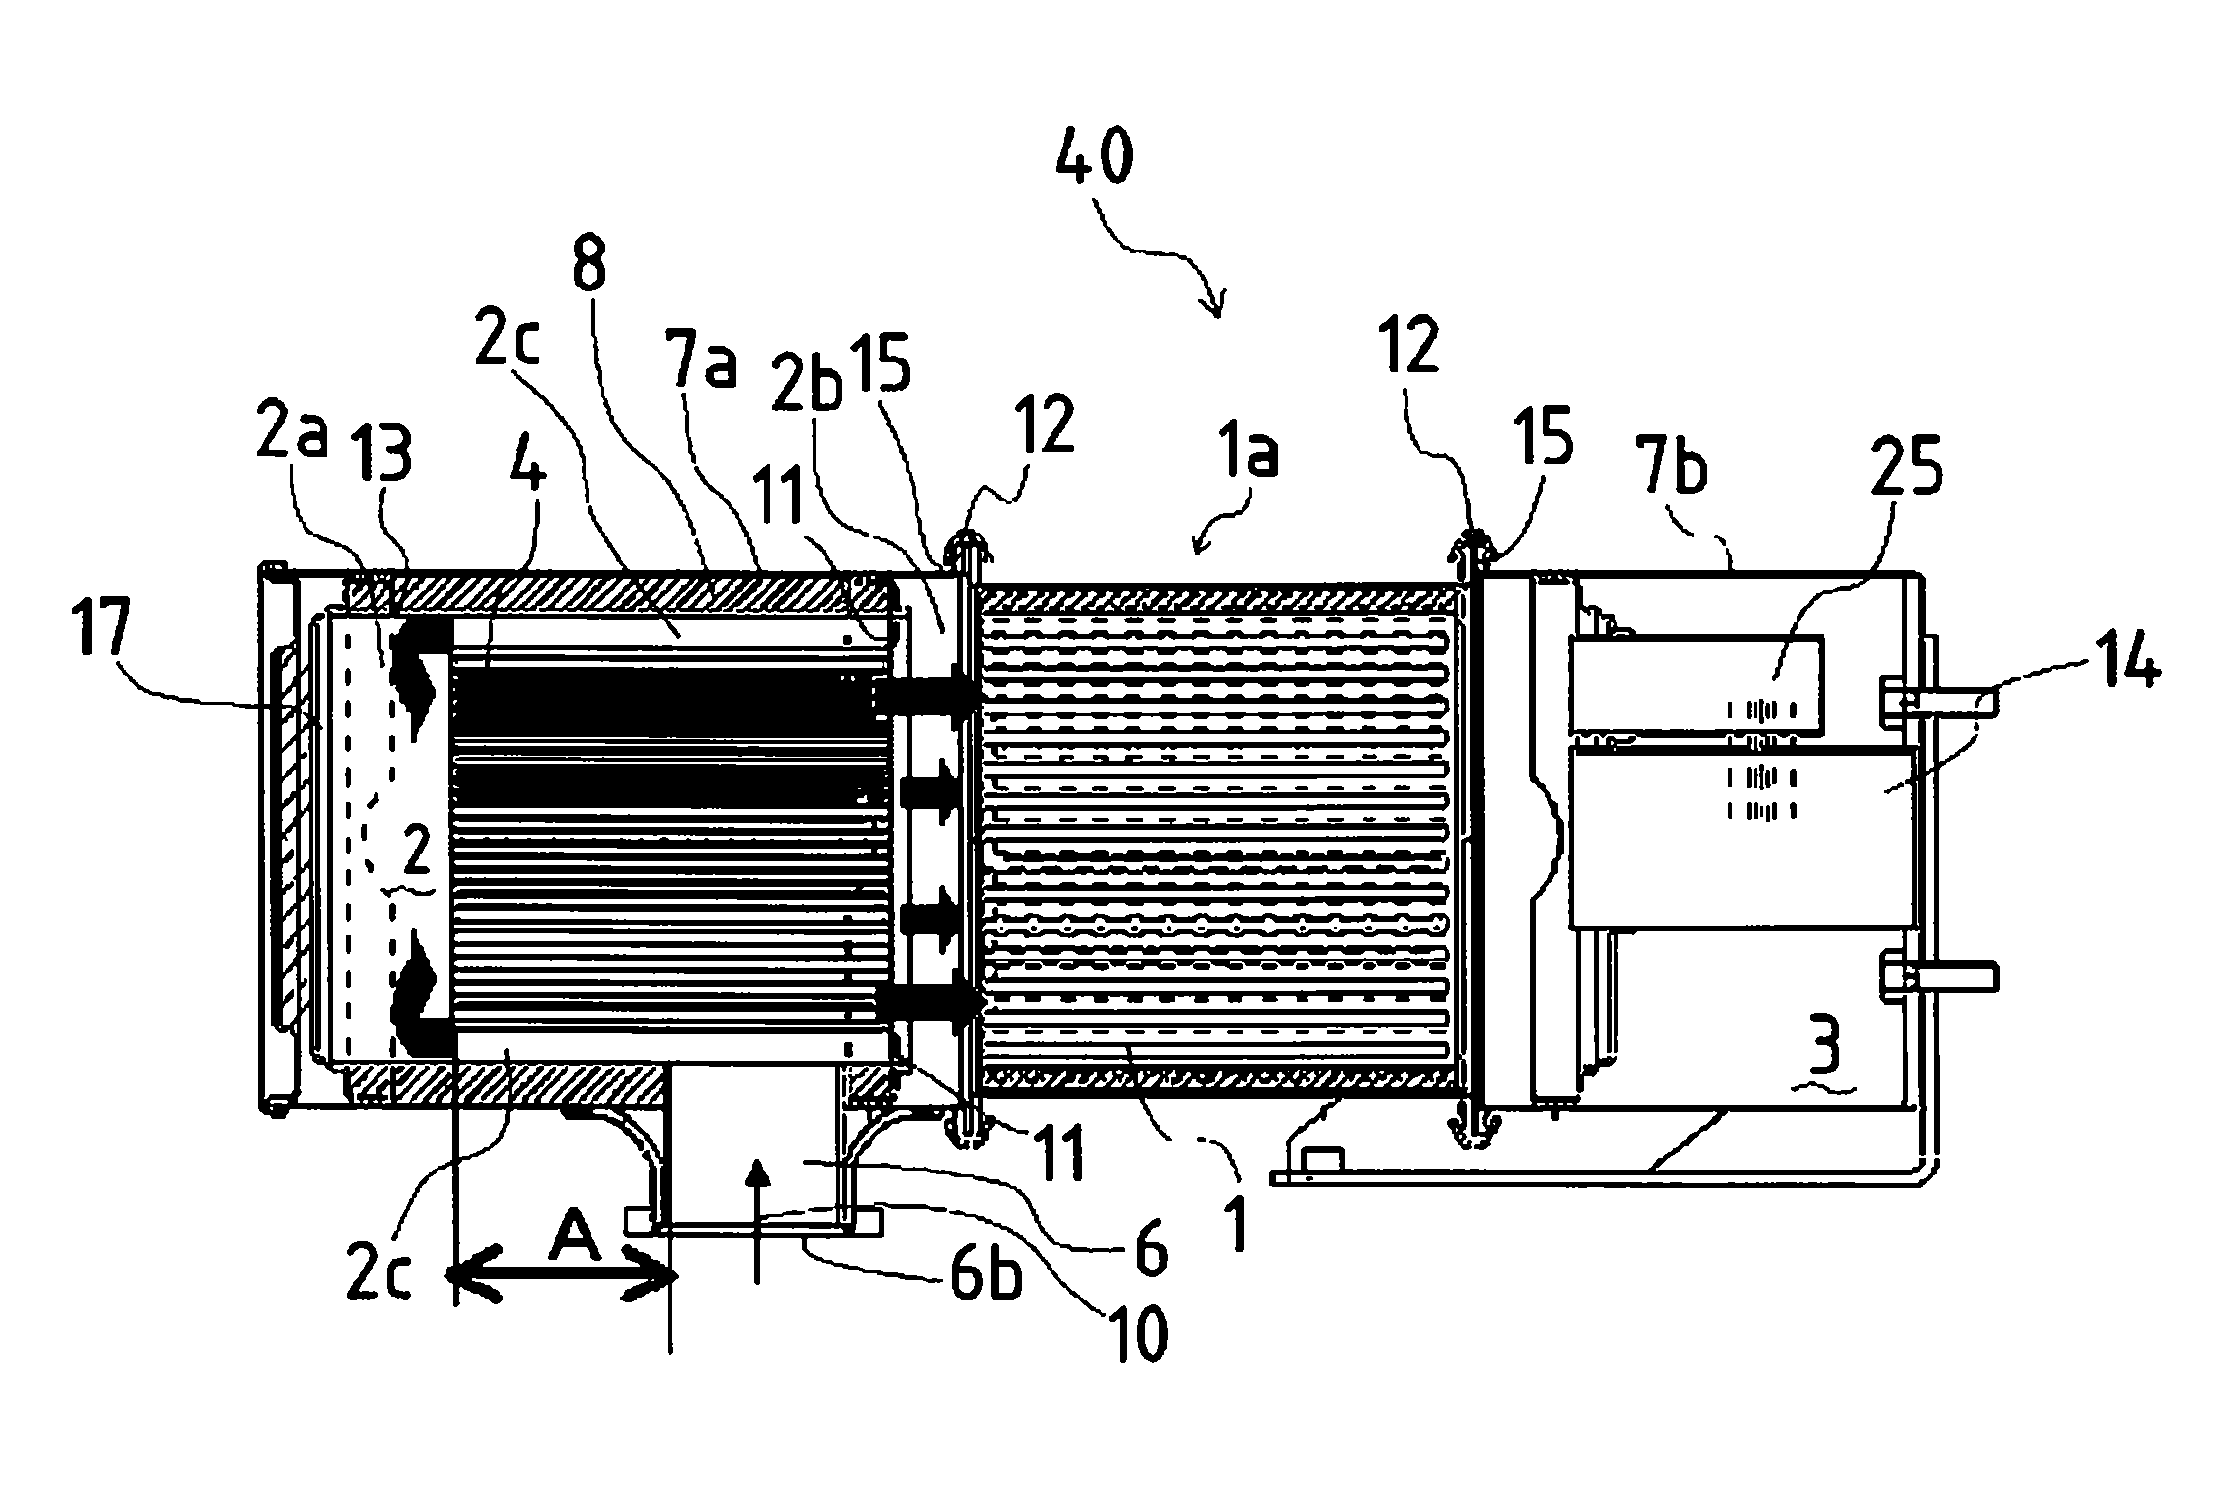 Black exhaust purification apparatus for diesel engine